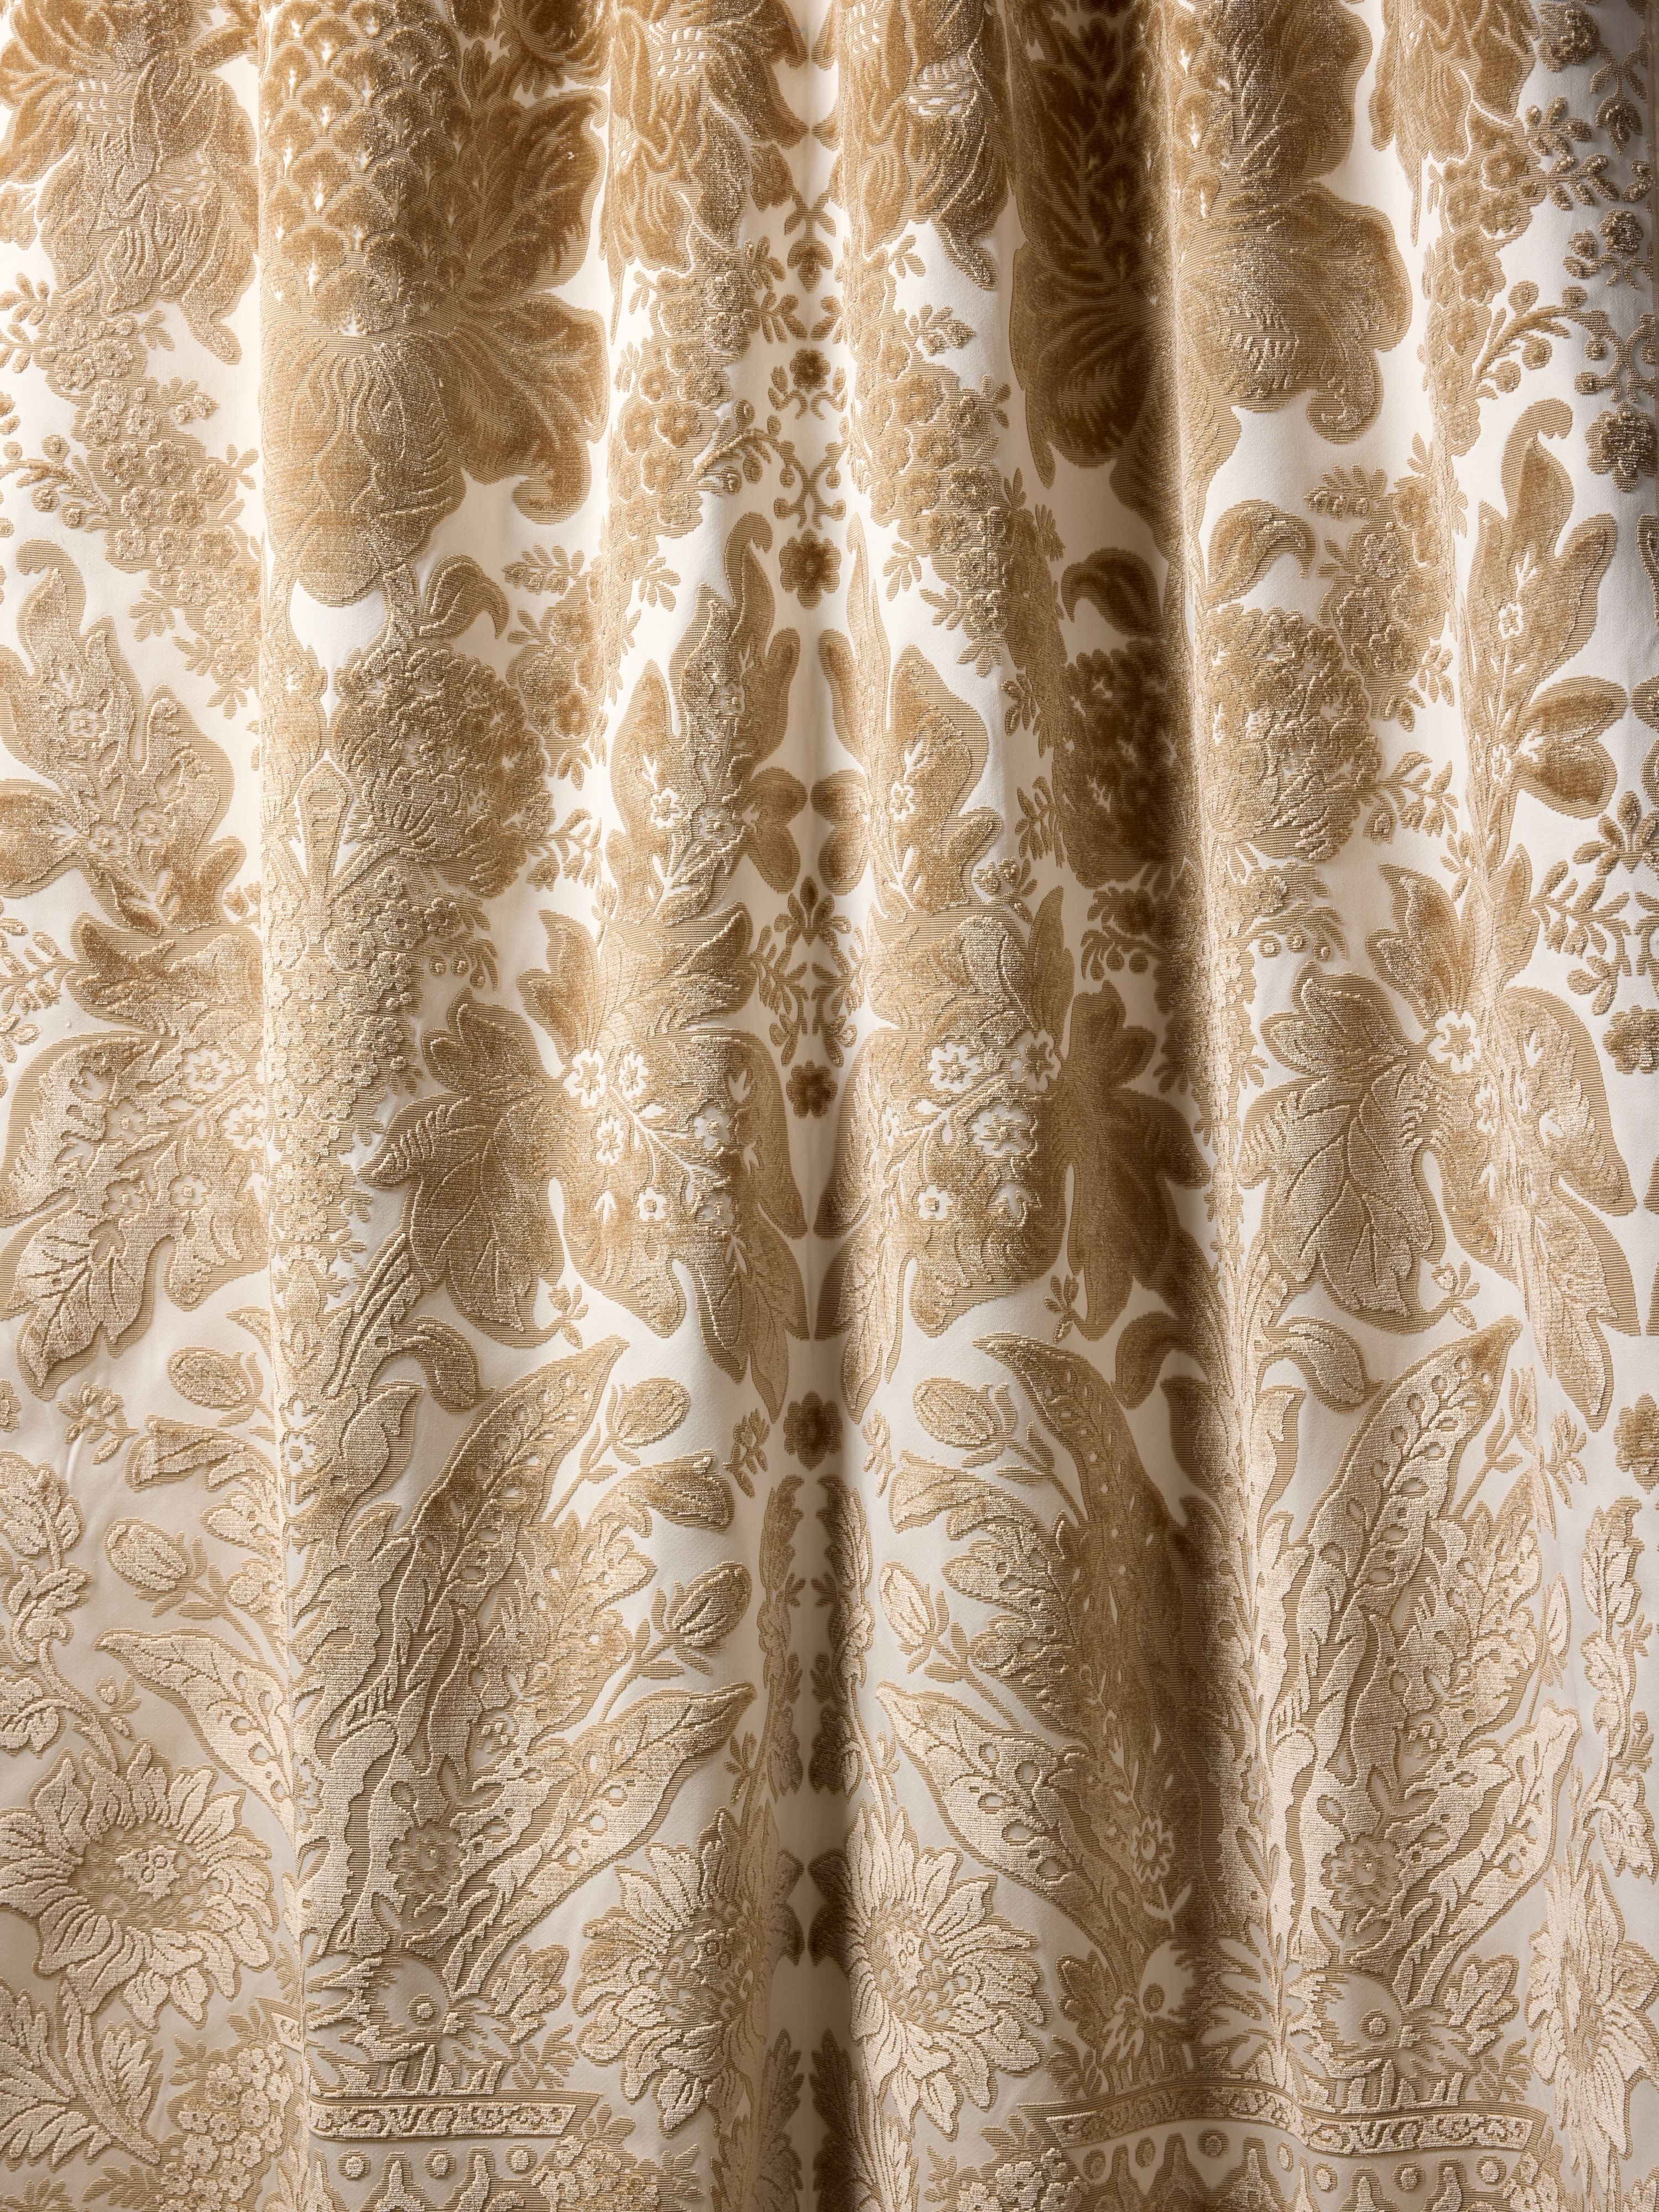 Regis Velvet Damask fabric in fawn color - pattern number SC 000127321 - by Scalamandre in the Scalamandre Fabrics Book 1 collection